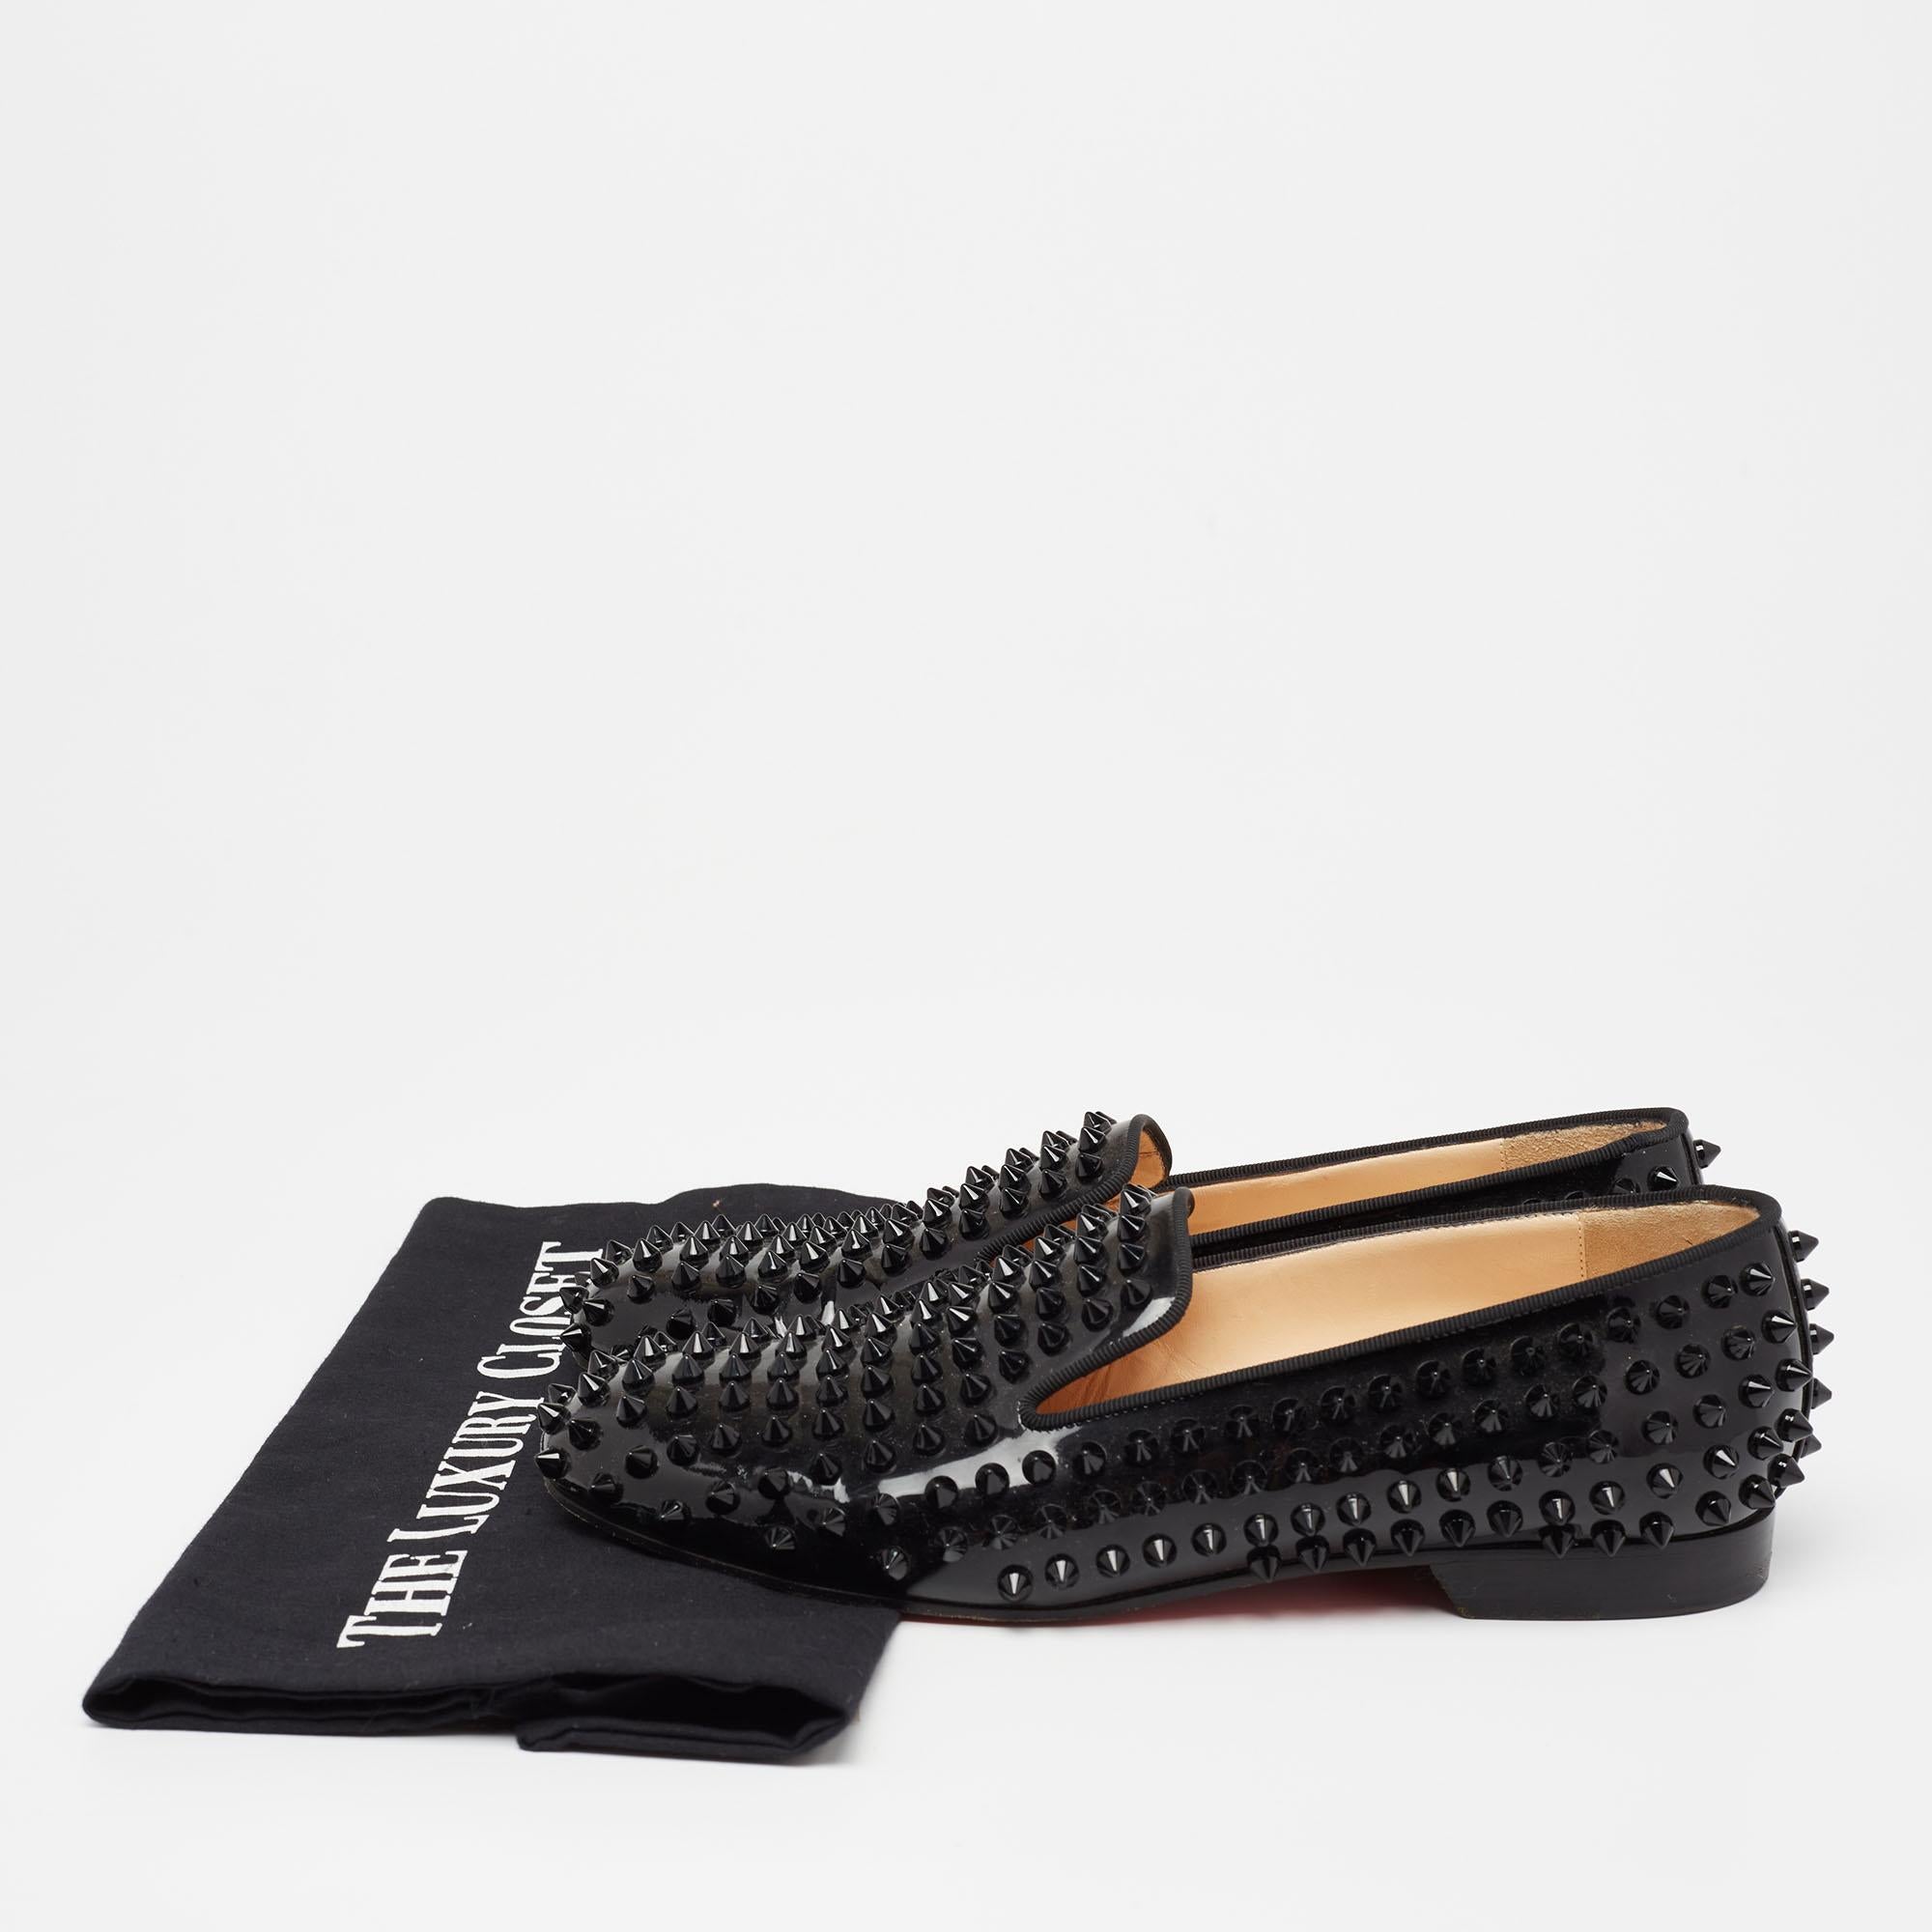 Christian Louboutin Black Patent Leather Dandelion Spikes Slippers Size 37 In Good Condition For Sale In Dubai, Al Qouz 2